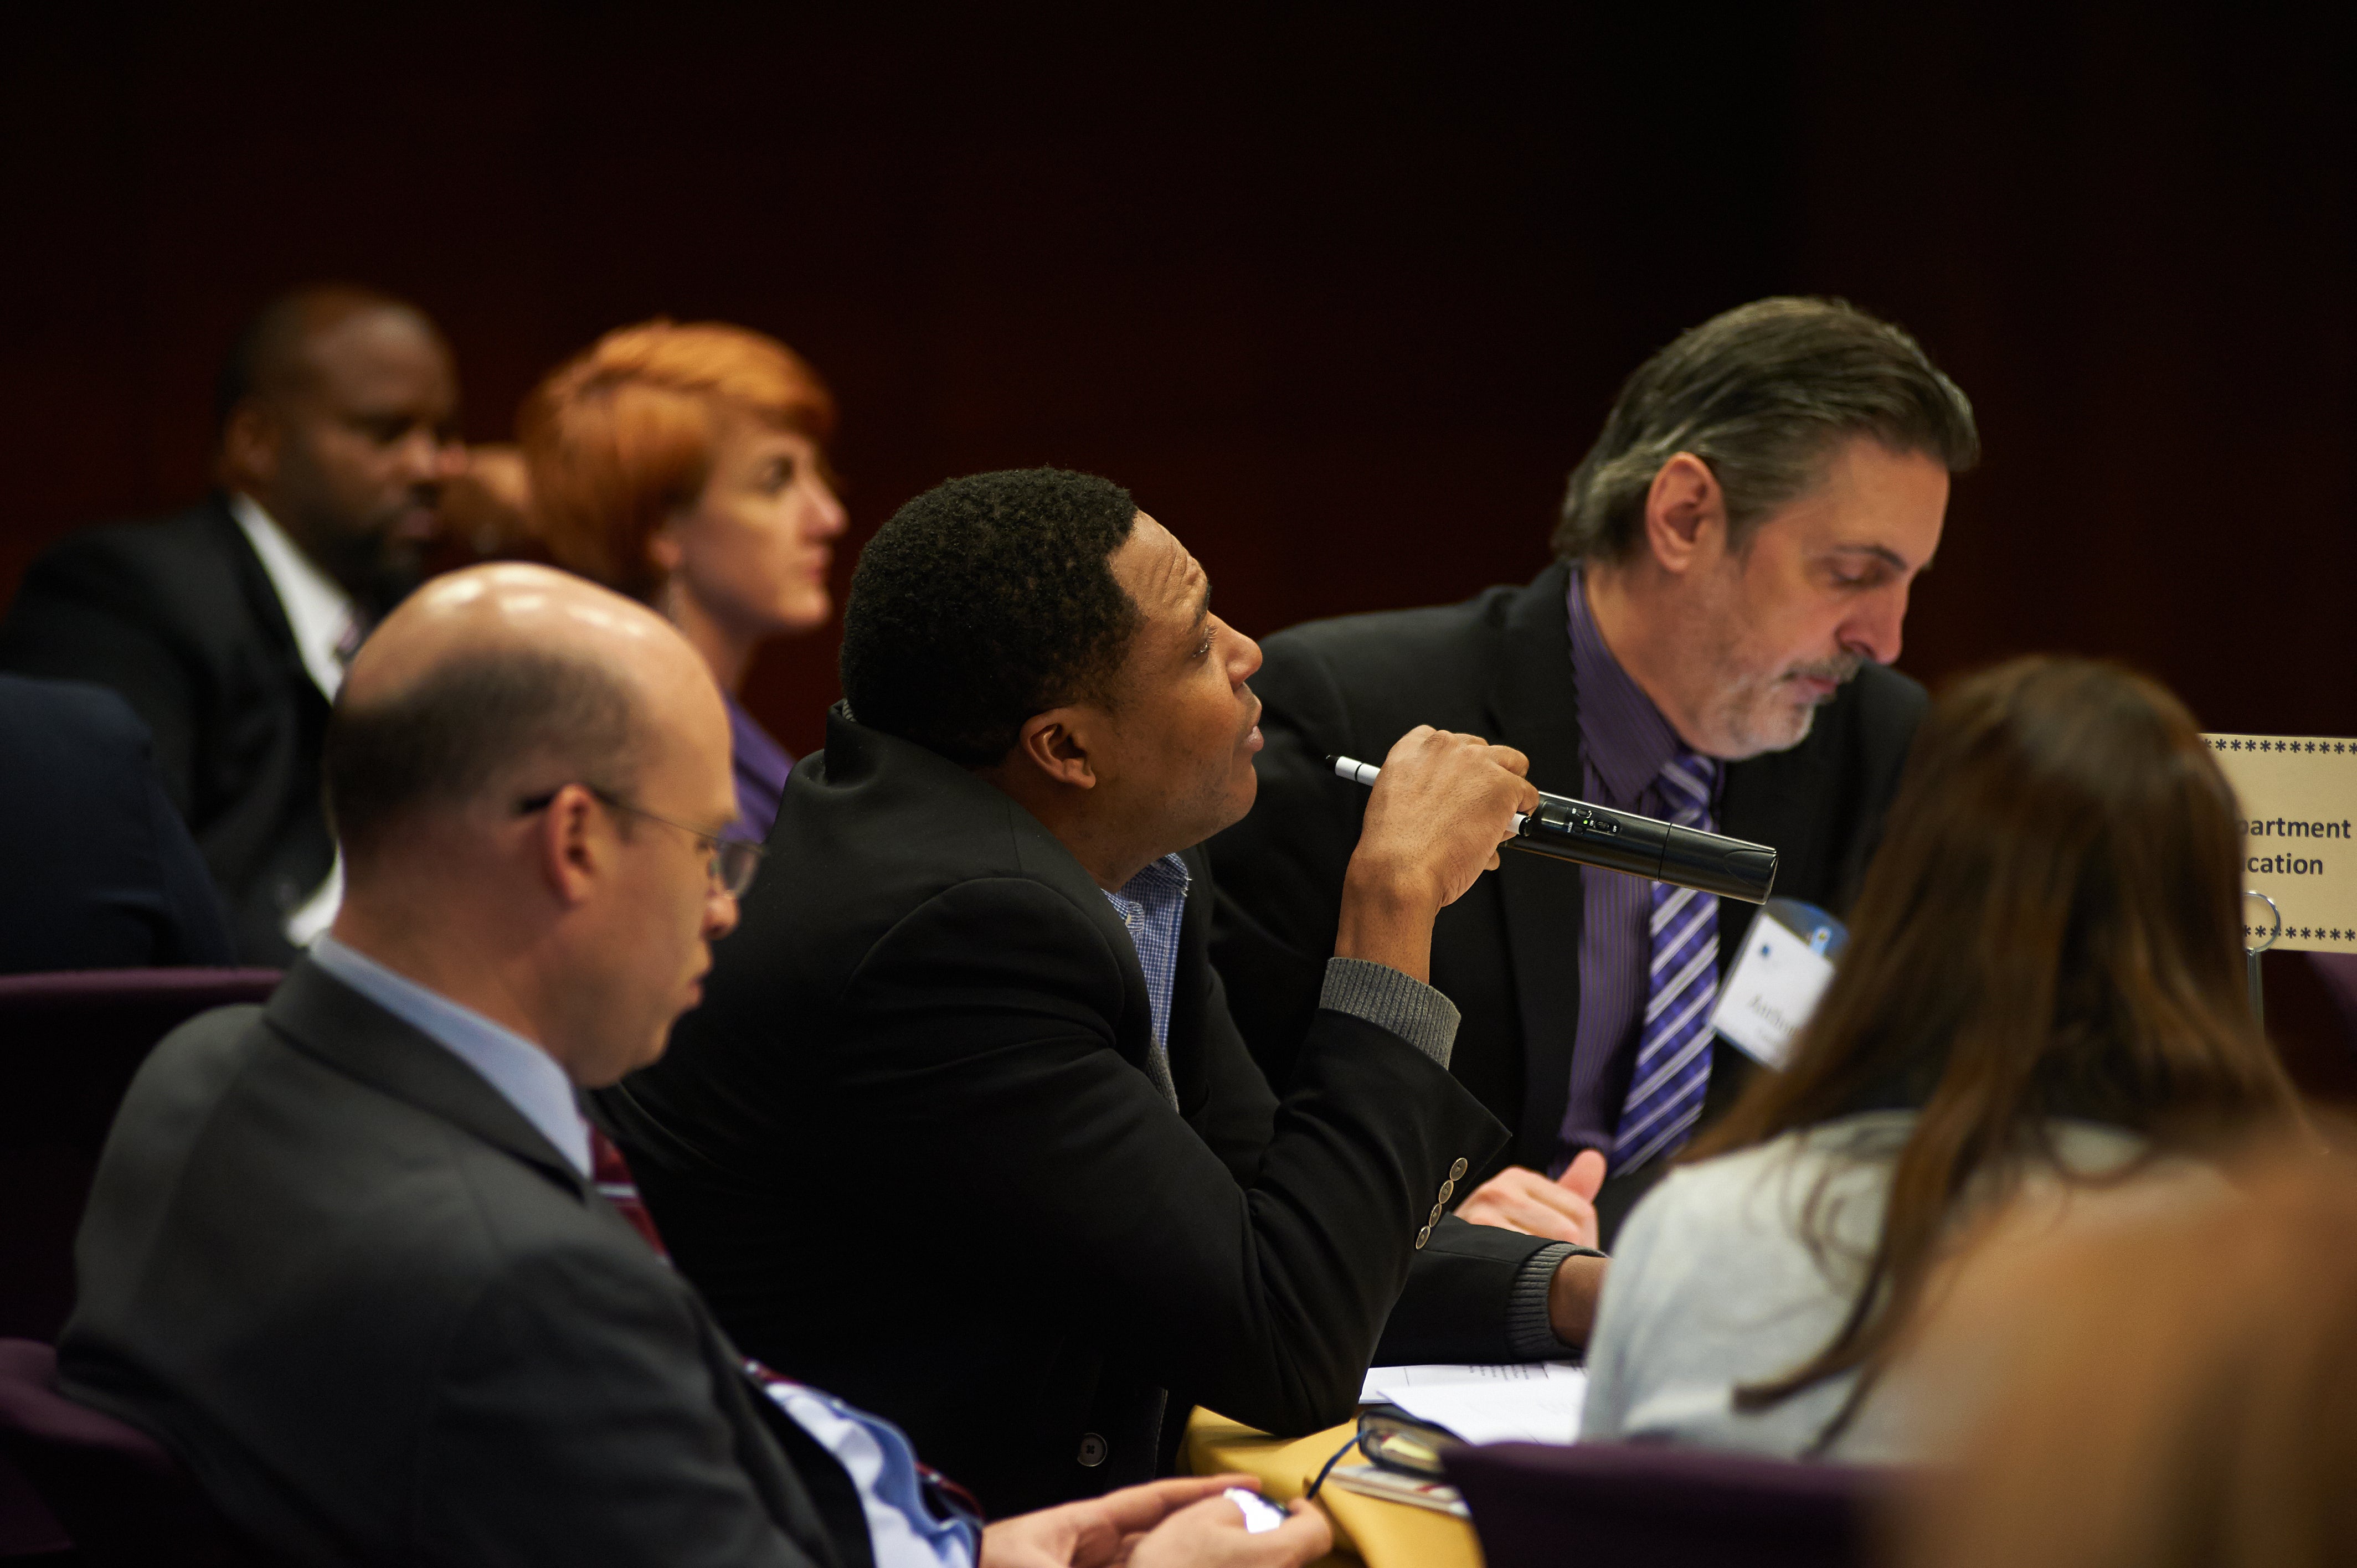 An attendee at an education leadership conference asks a question to the panelists.